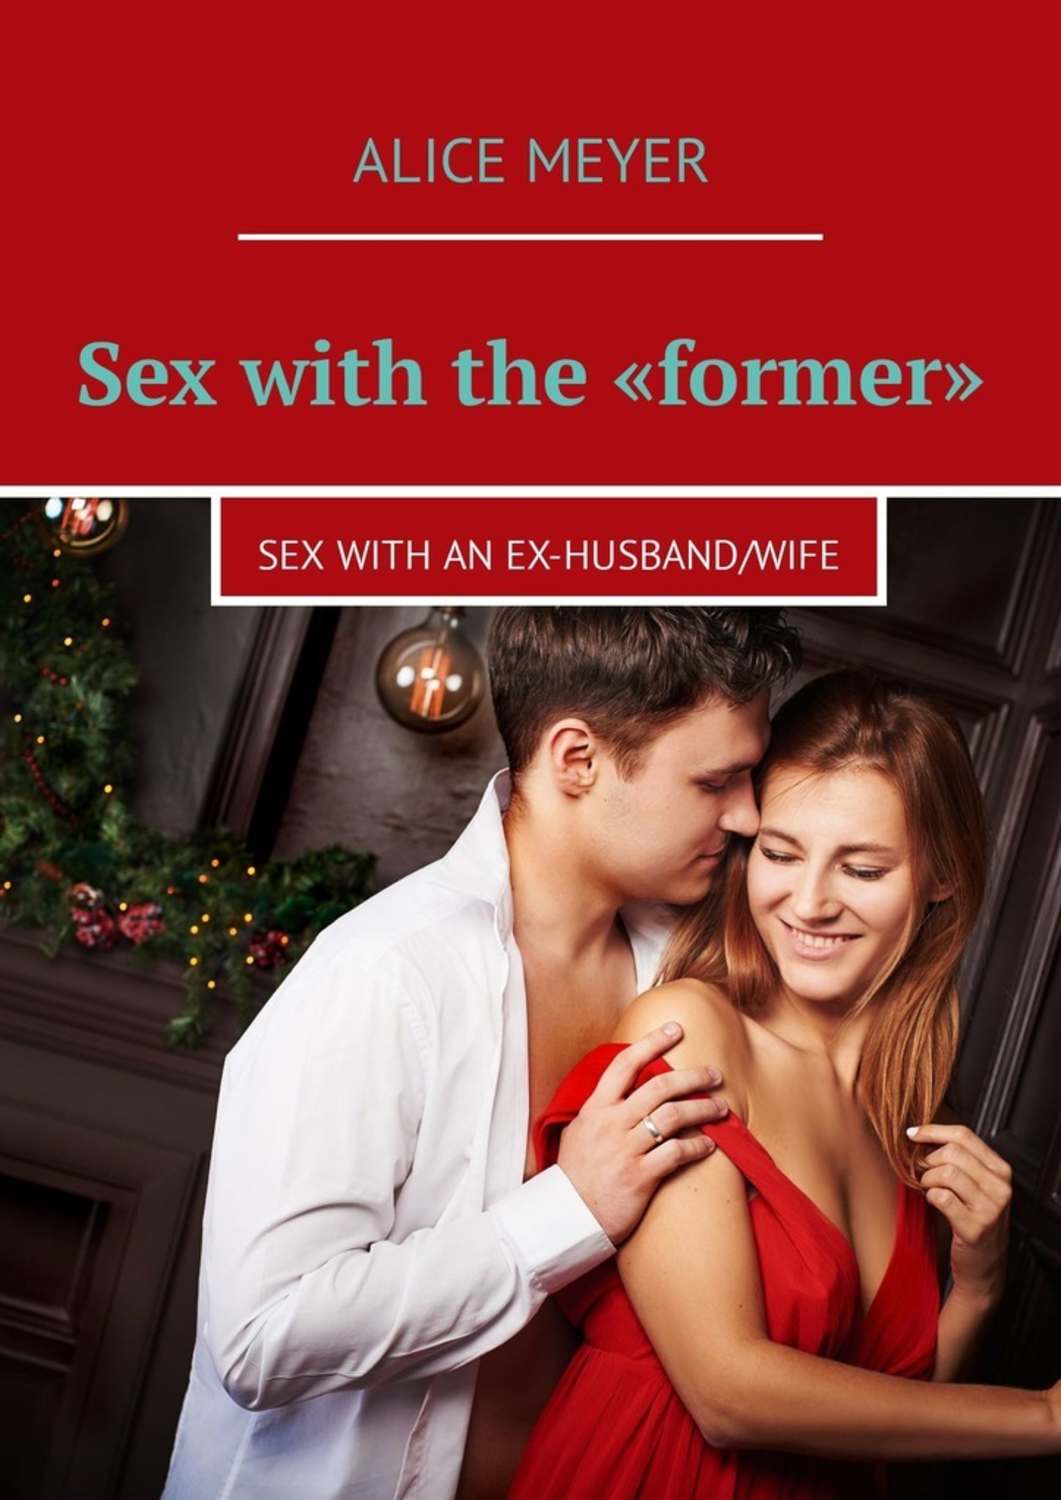 Alice Meyer, Sex with the «former»